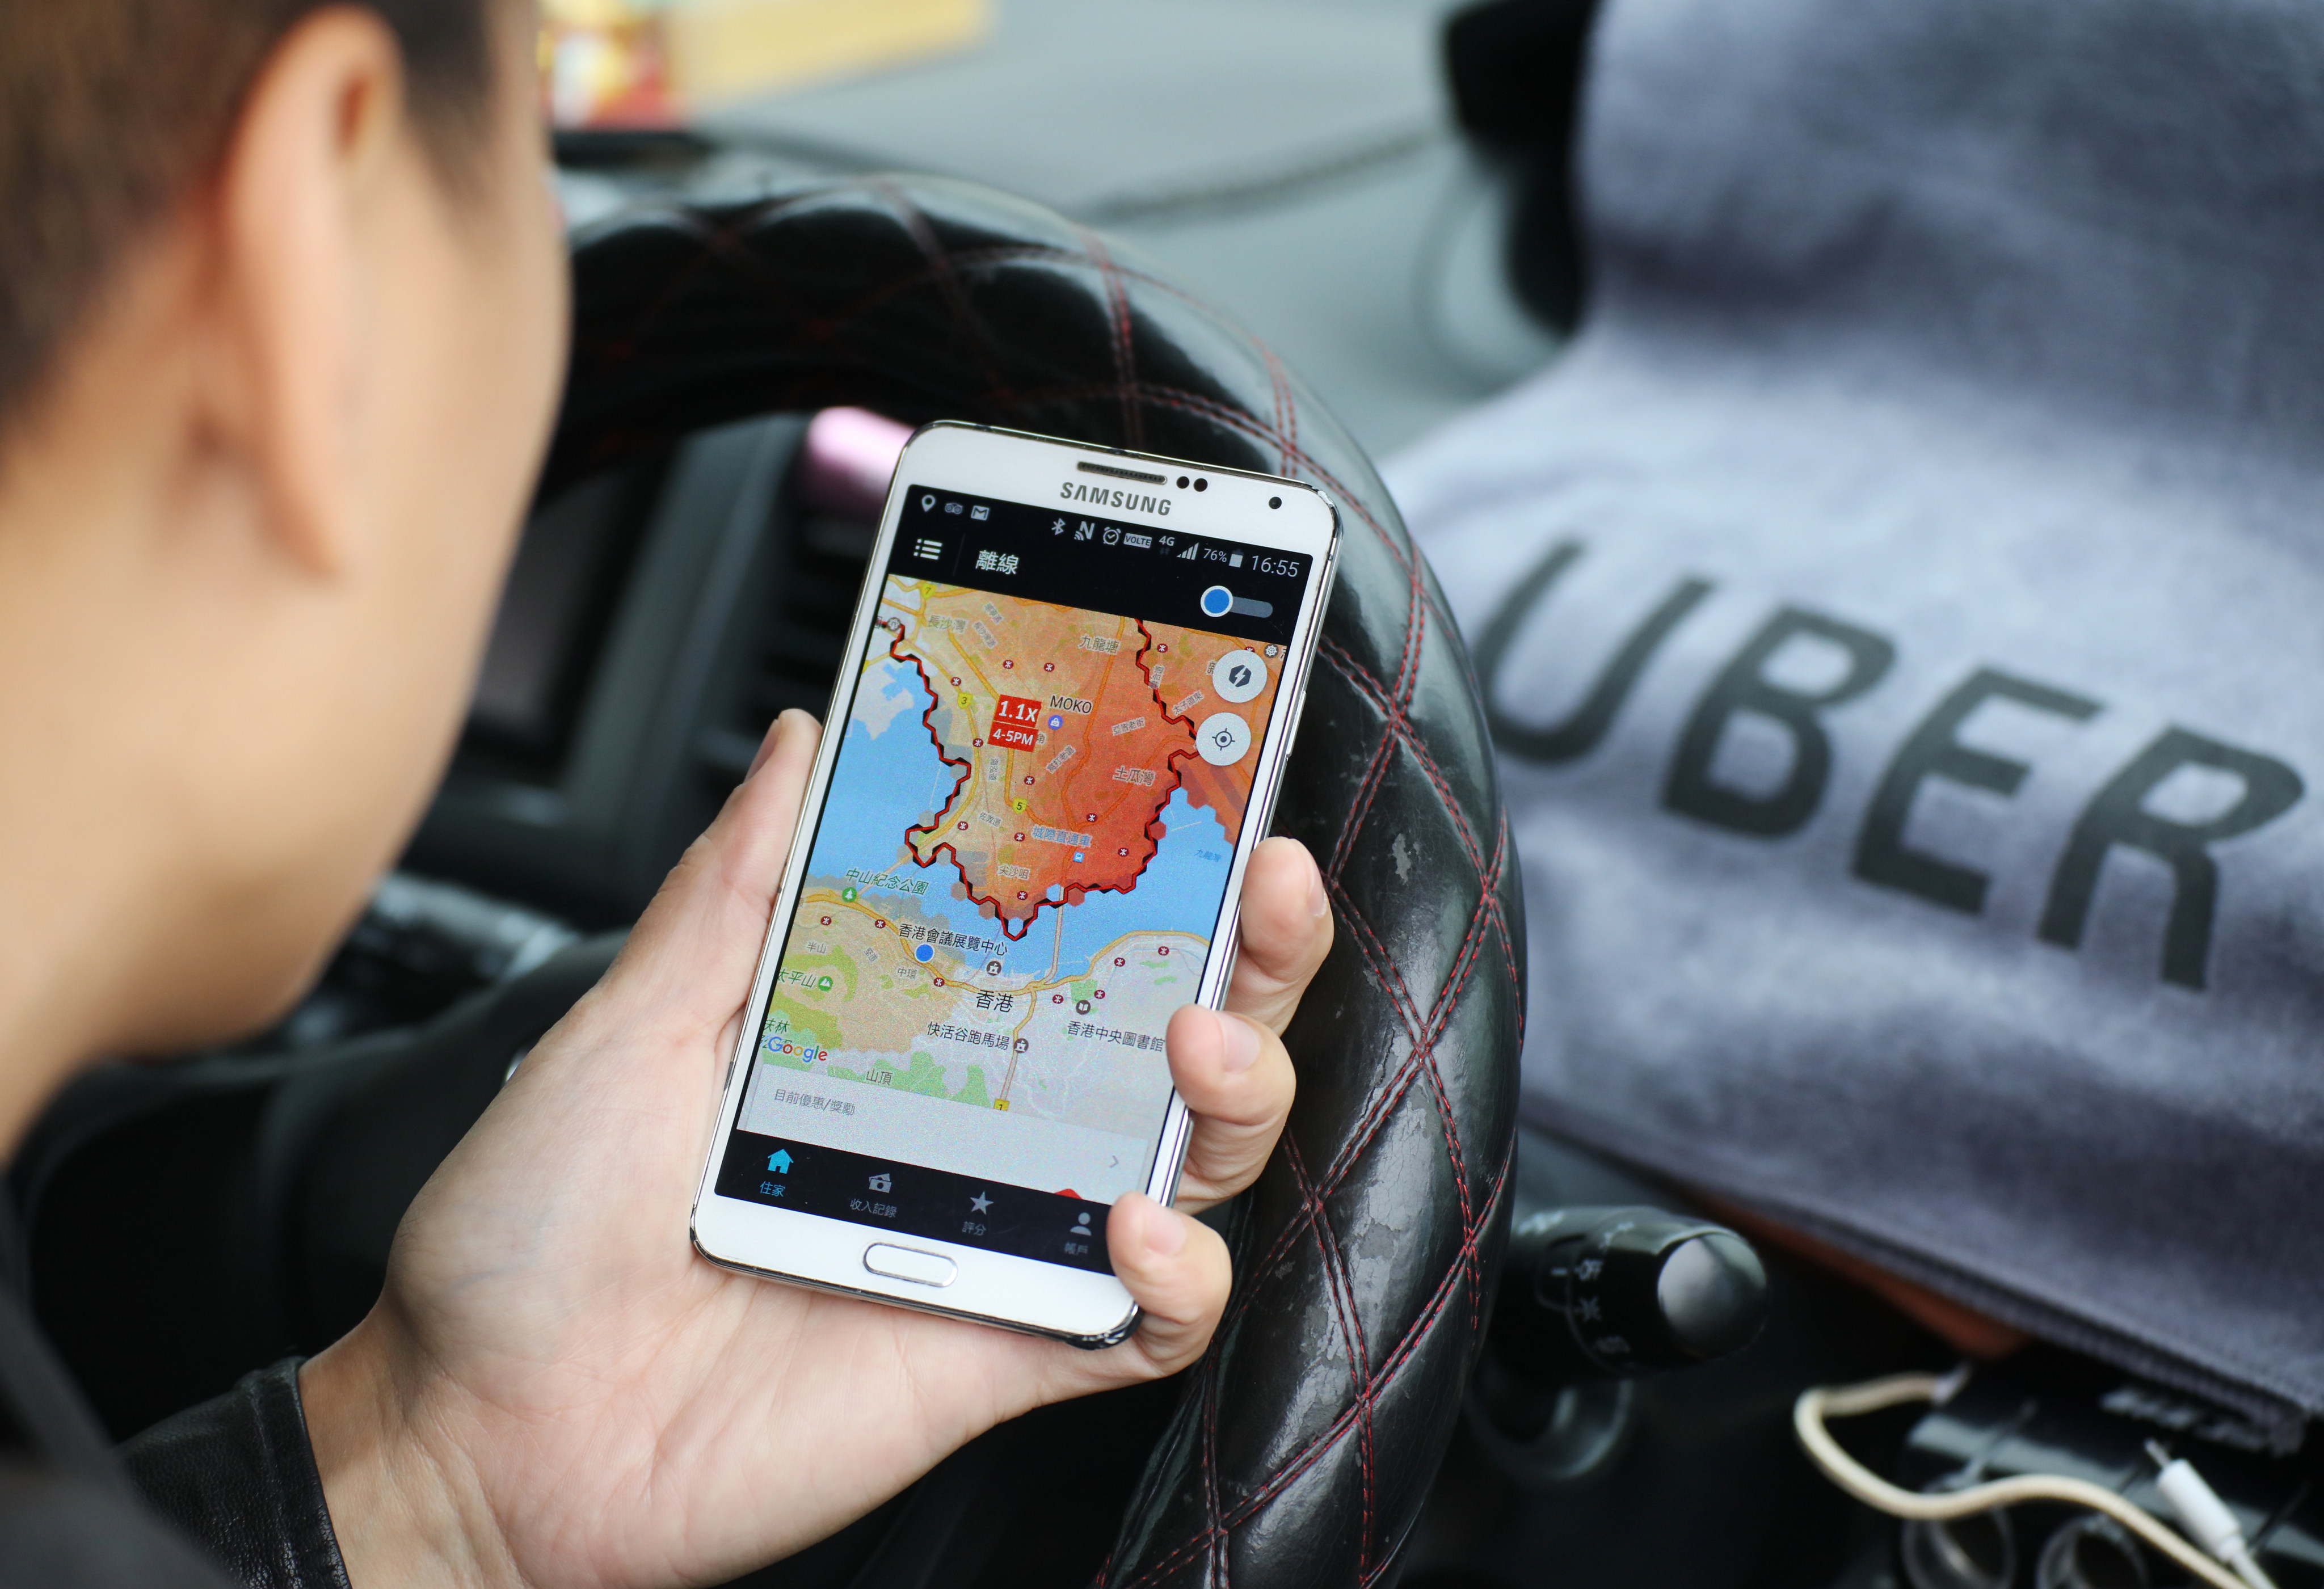 Uber has been in the city since 2014, but many drivers are believed to be operating without a private hire car permit. Photo: Felix Wong